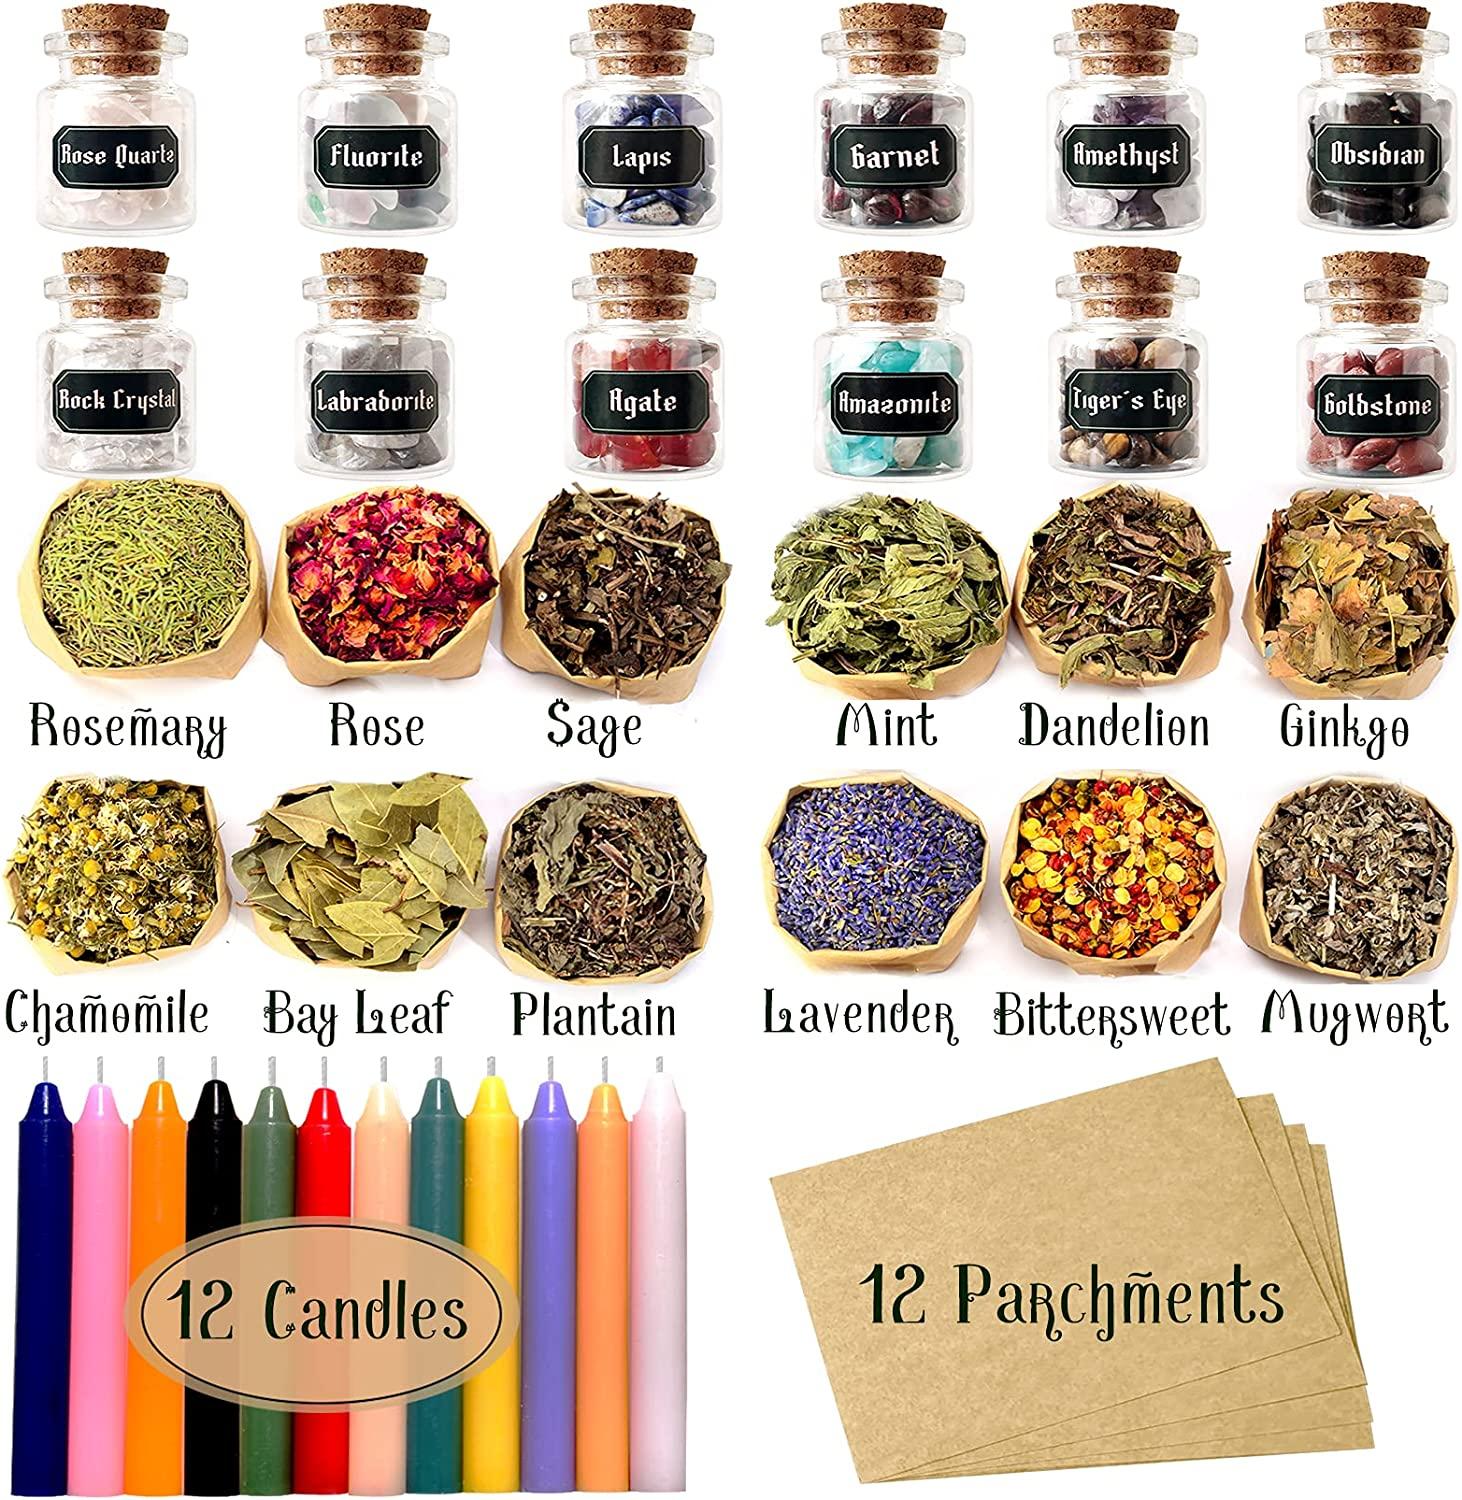 Beginner Witches Herb Kit, Witches 12 Starter Herb Kit, Witchcraft Supply,  Wicca, Pagan, Spell Supplies, Herb Kit, Magic Herbs, Dried Herbs 